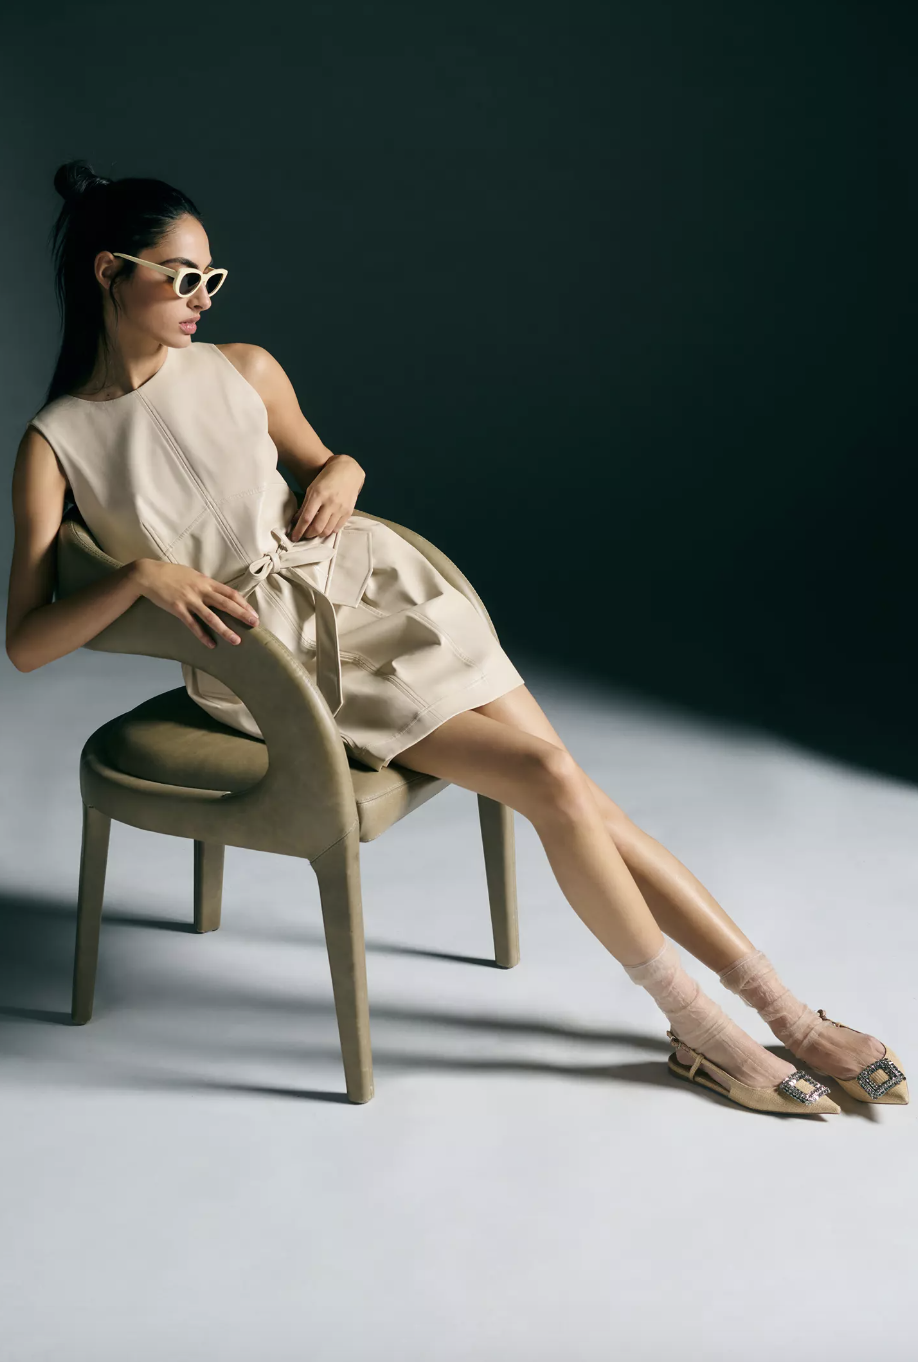 model sitting in chair wearing light beige belted Shoshanna Faux Leather Dress (photo via Anthropologie)